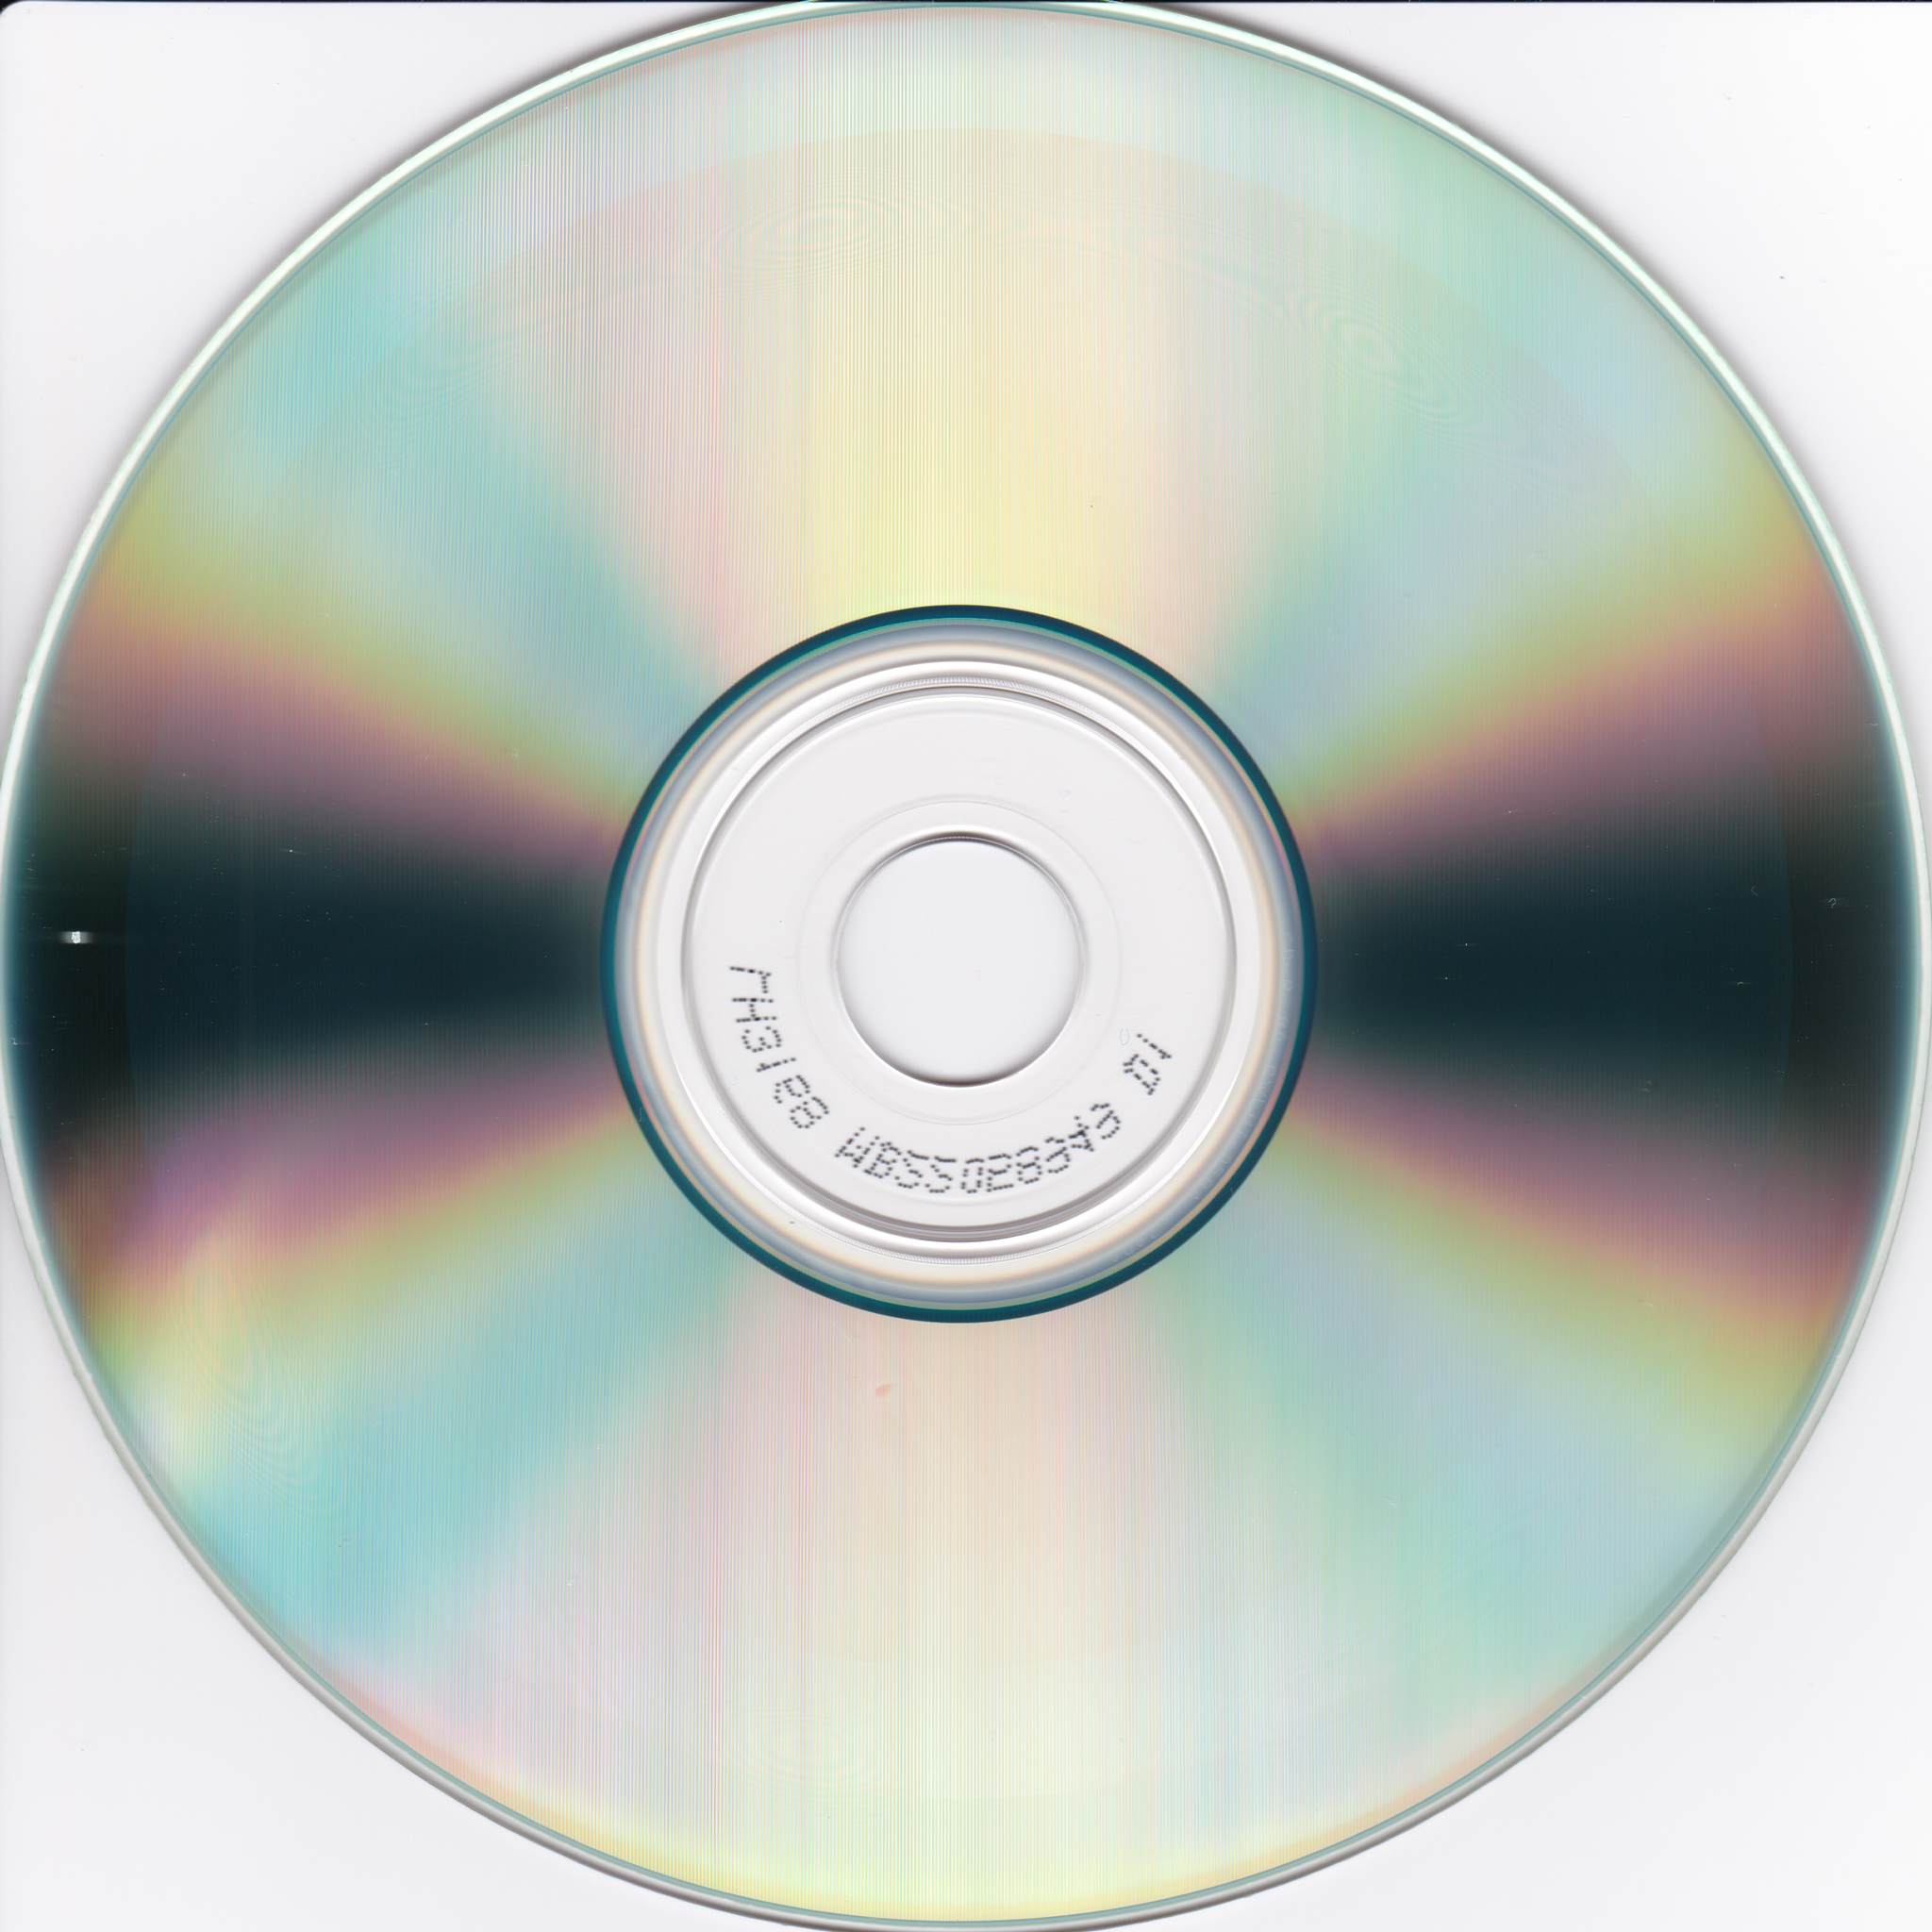 File:Filthy DVD-R.png - Wikipedia